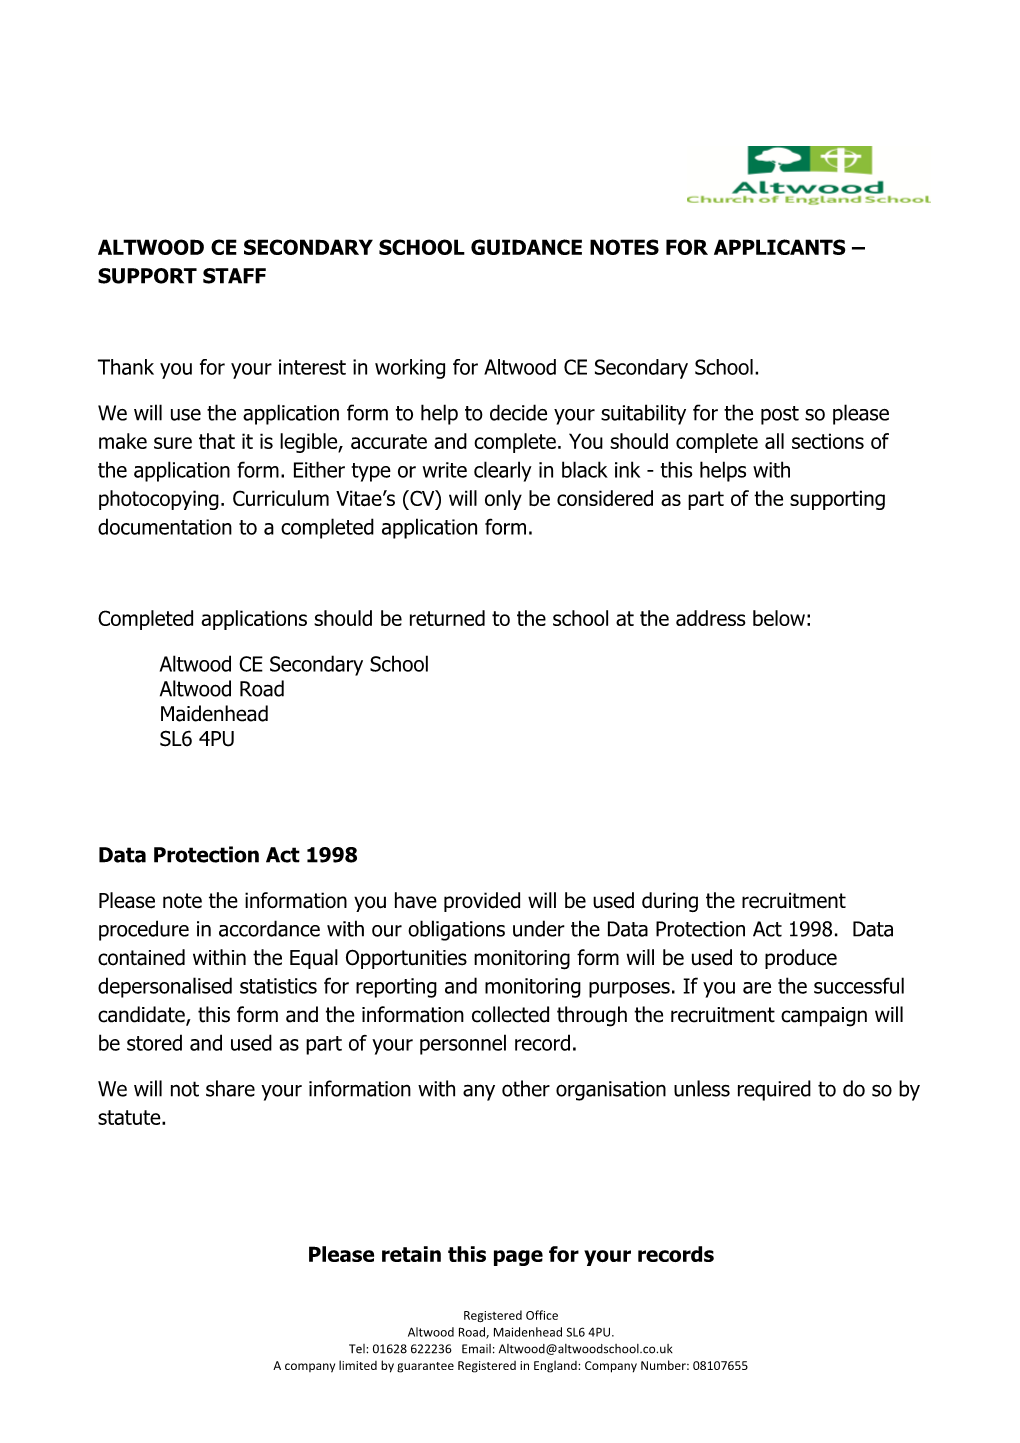 Altwood Ce Secondary School Guidance Notes for Applicants Support Staff